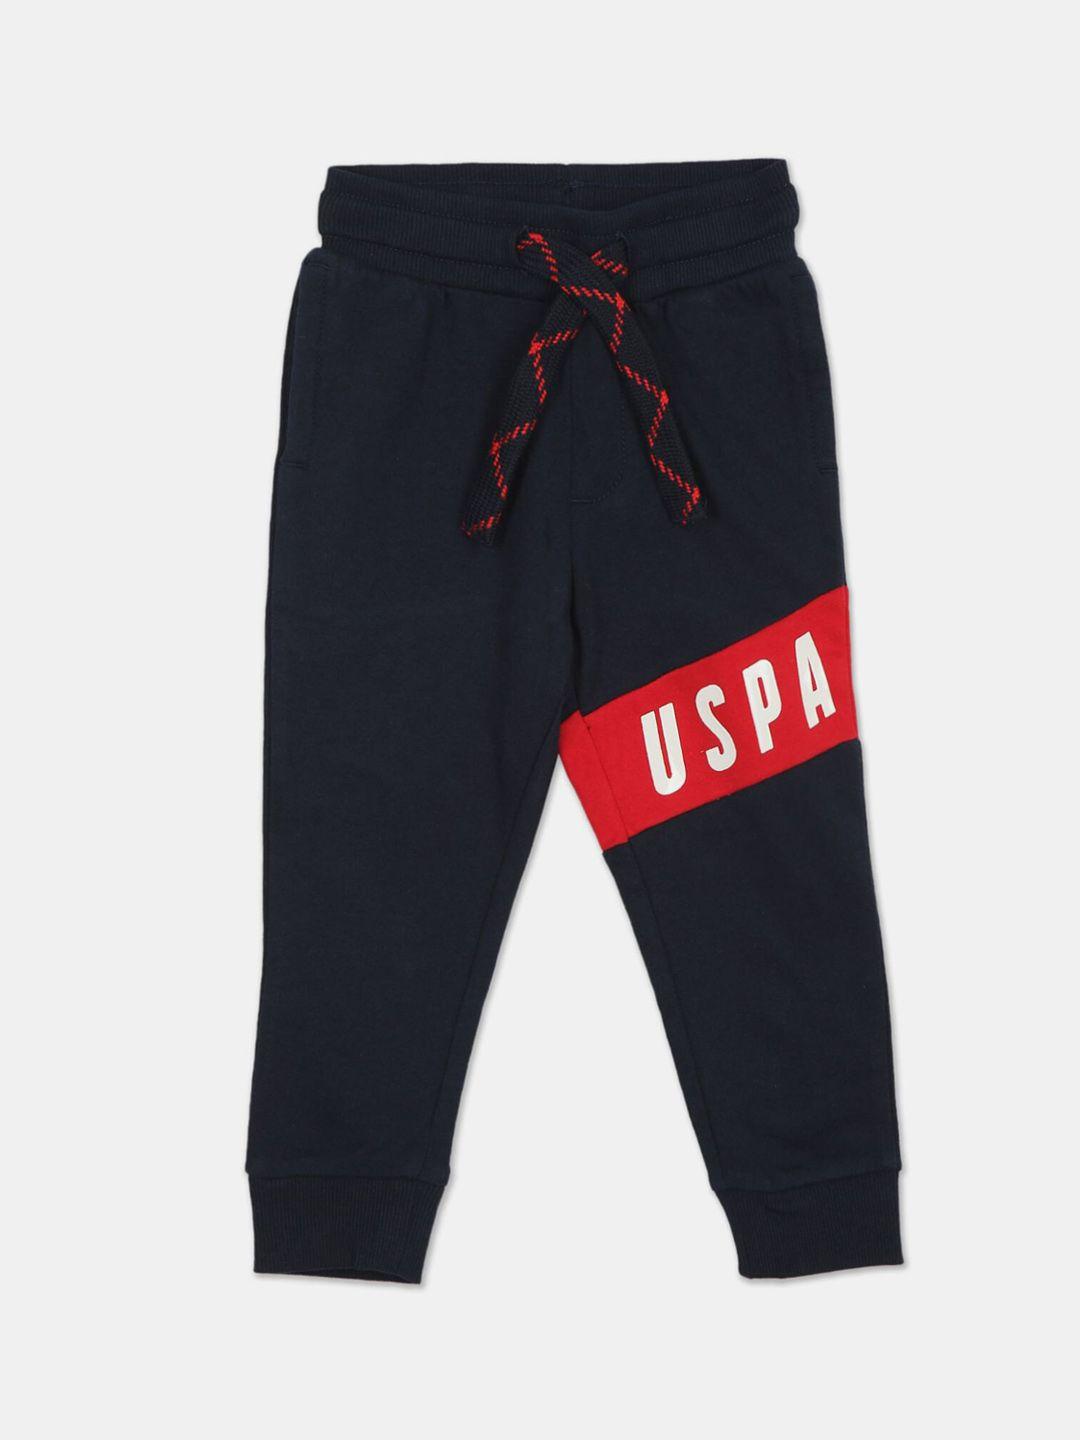 u.s. polo assn. boys navy blue & red brand logo printed straight-fit joggers